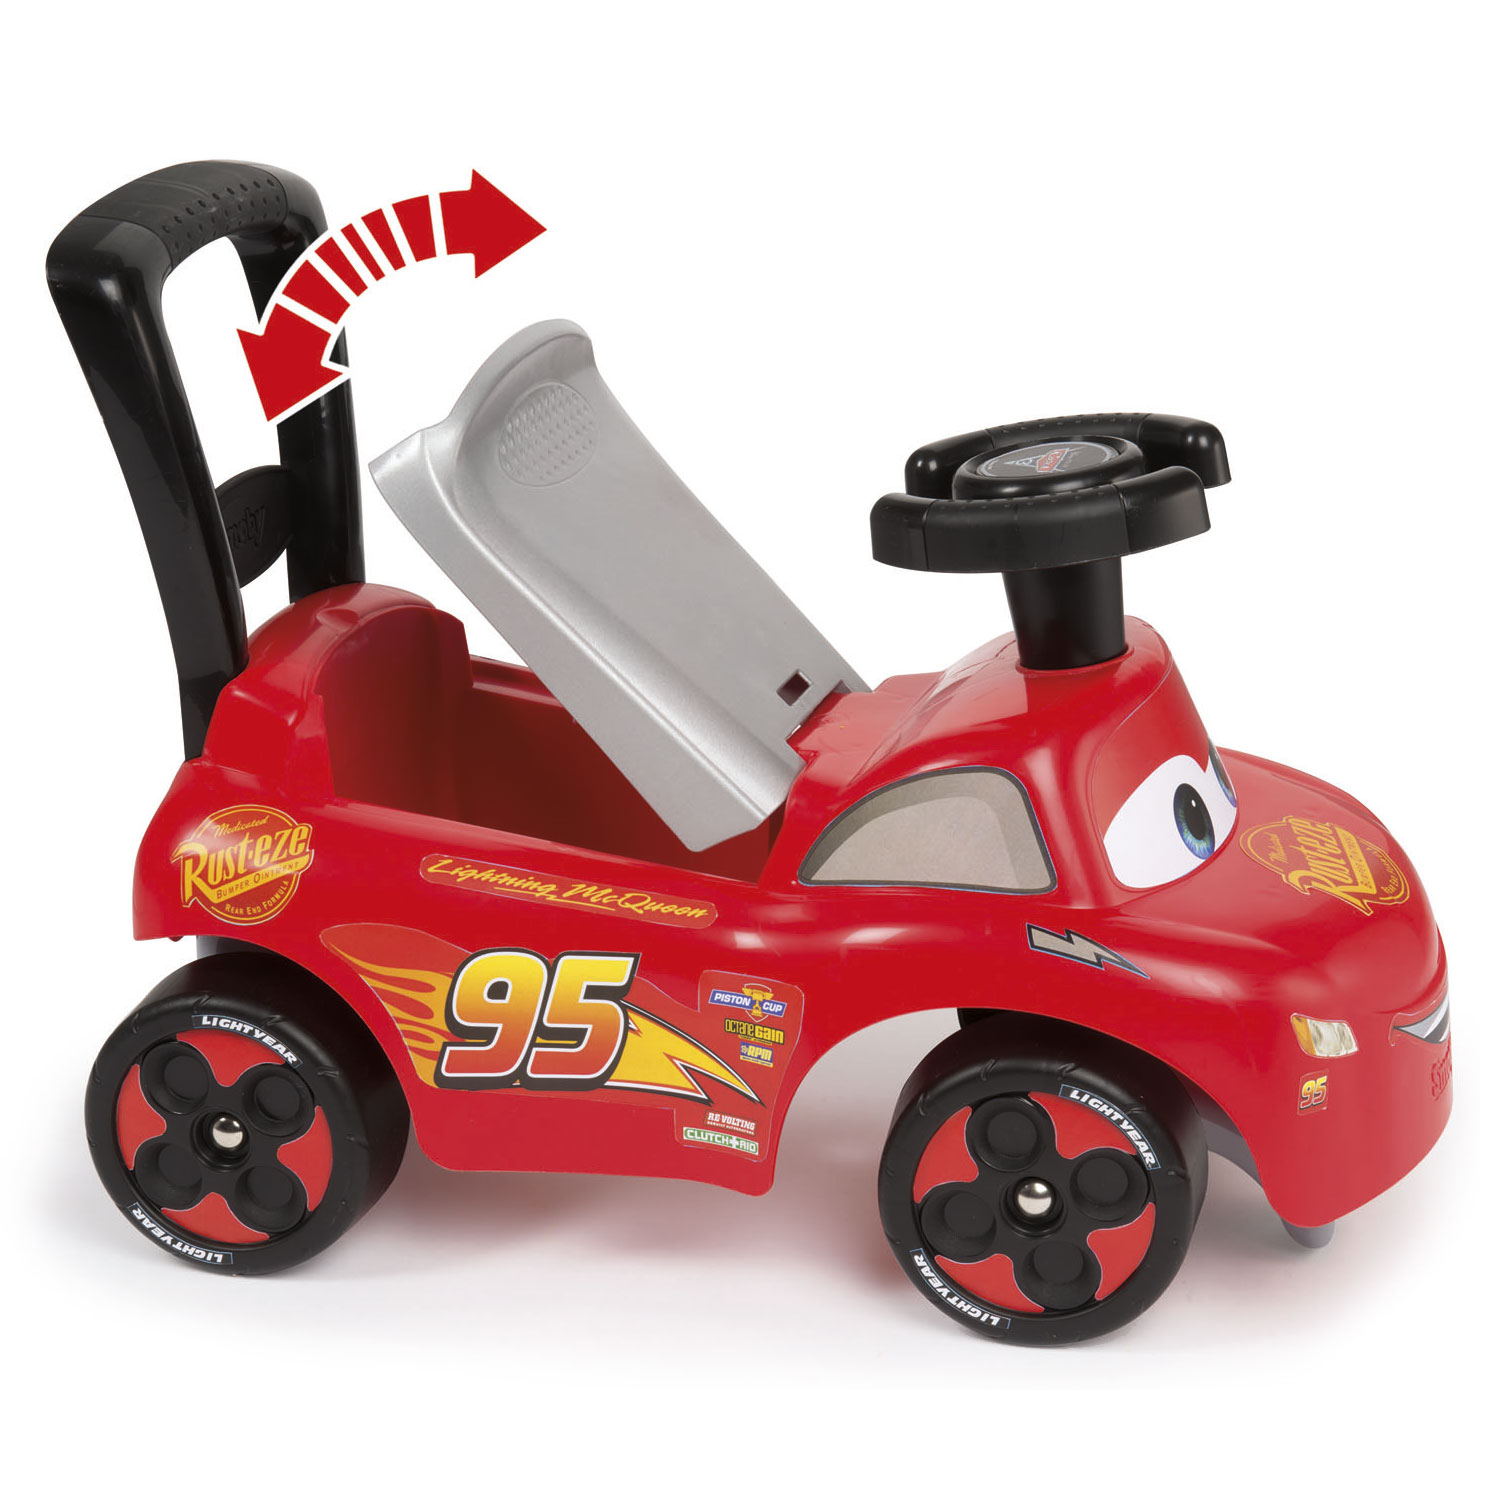 Smoby Cars Ride On